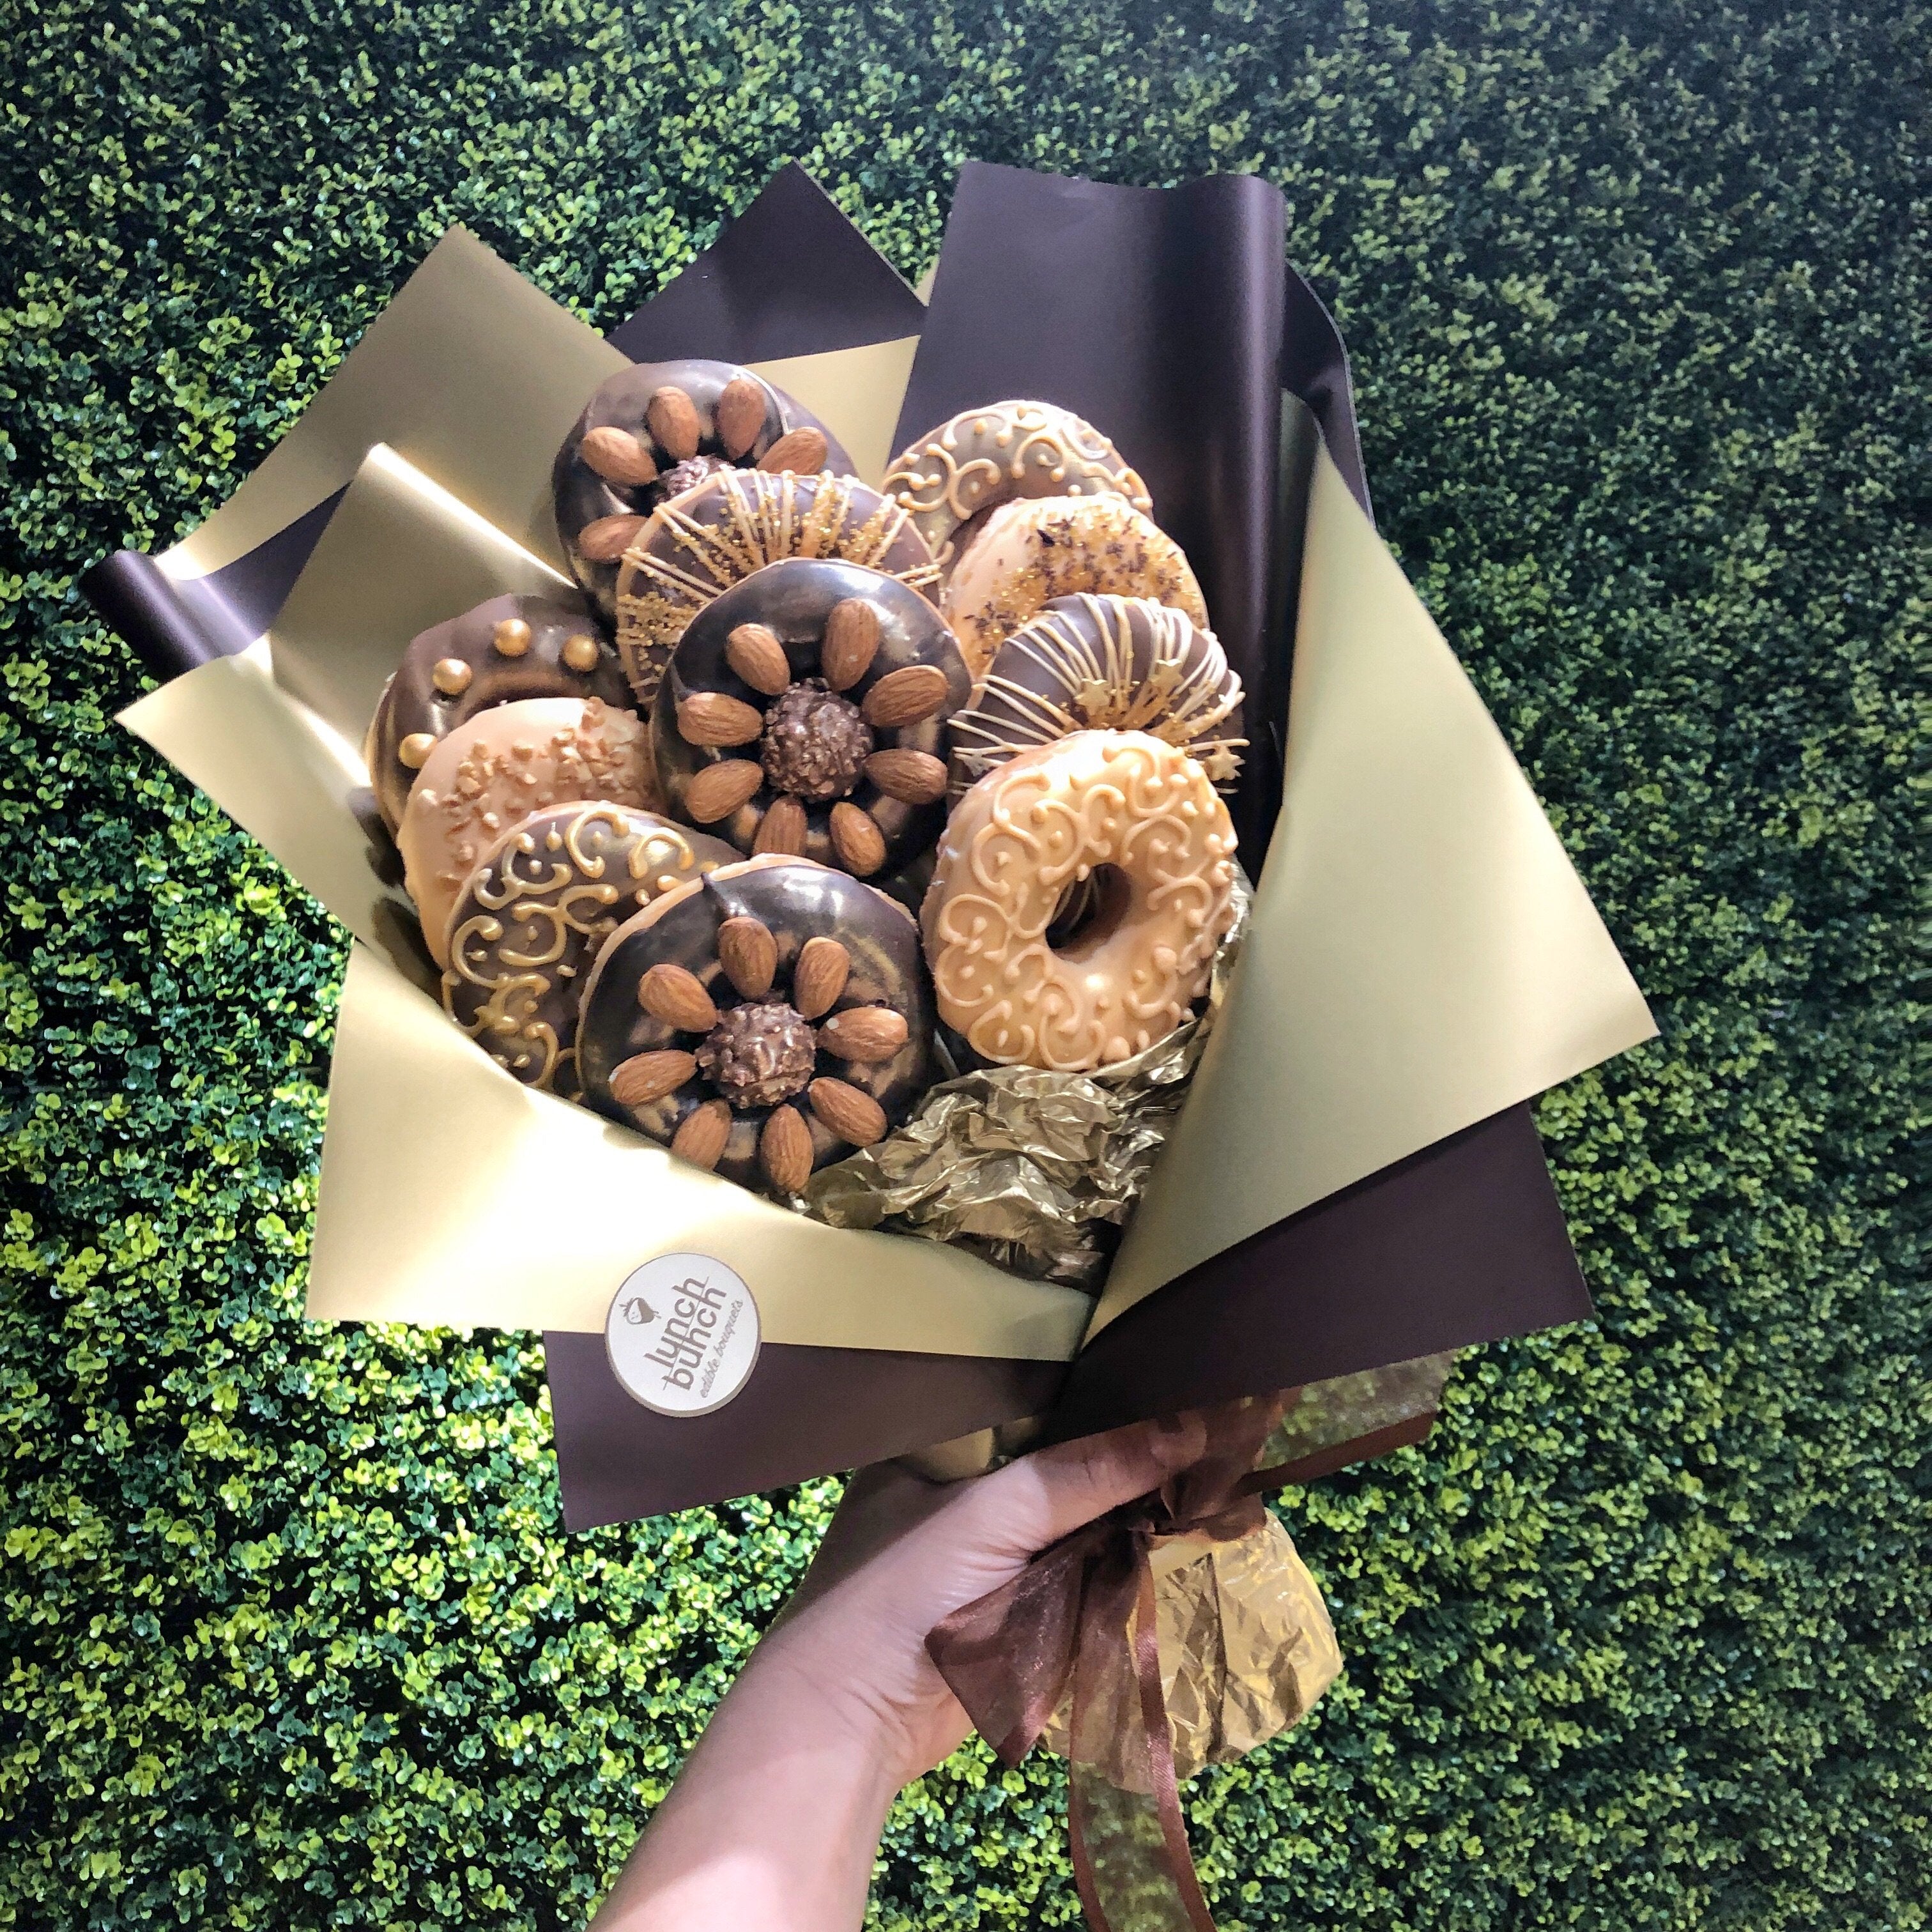 Luxury doughnut bouquet same day delivery Adelaide order online